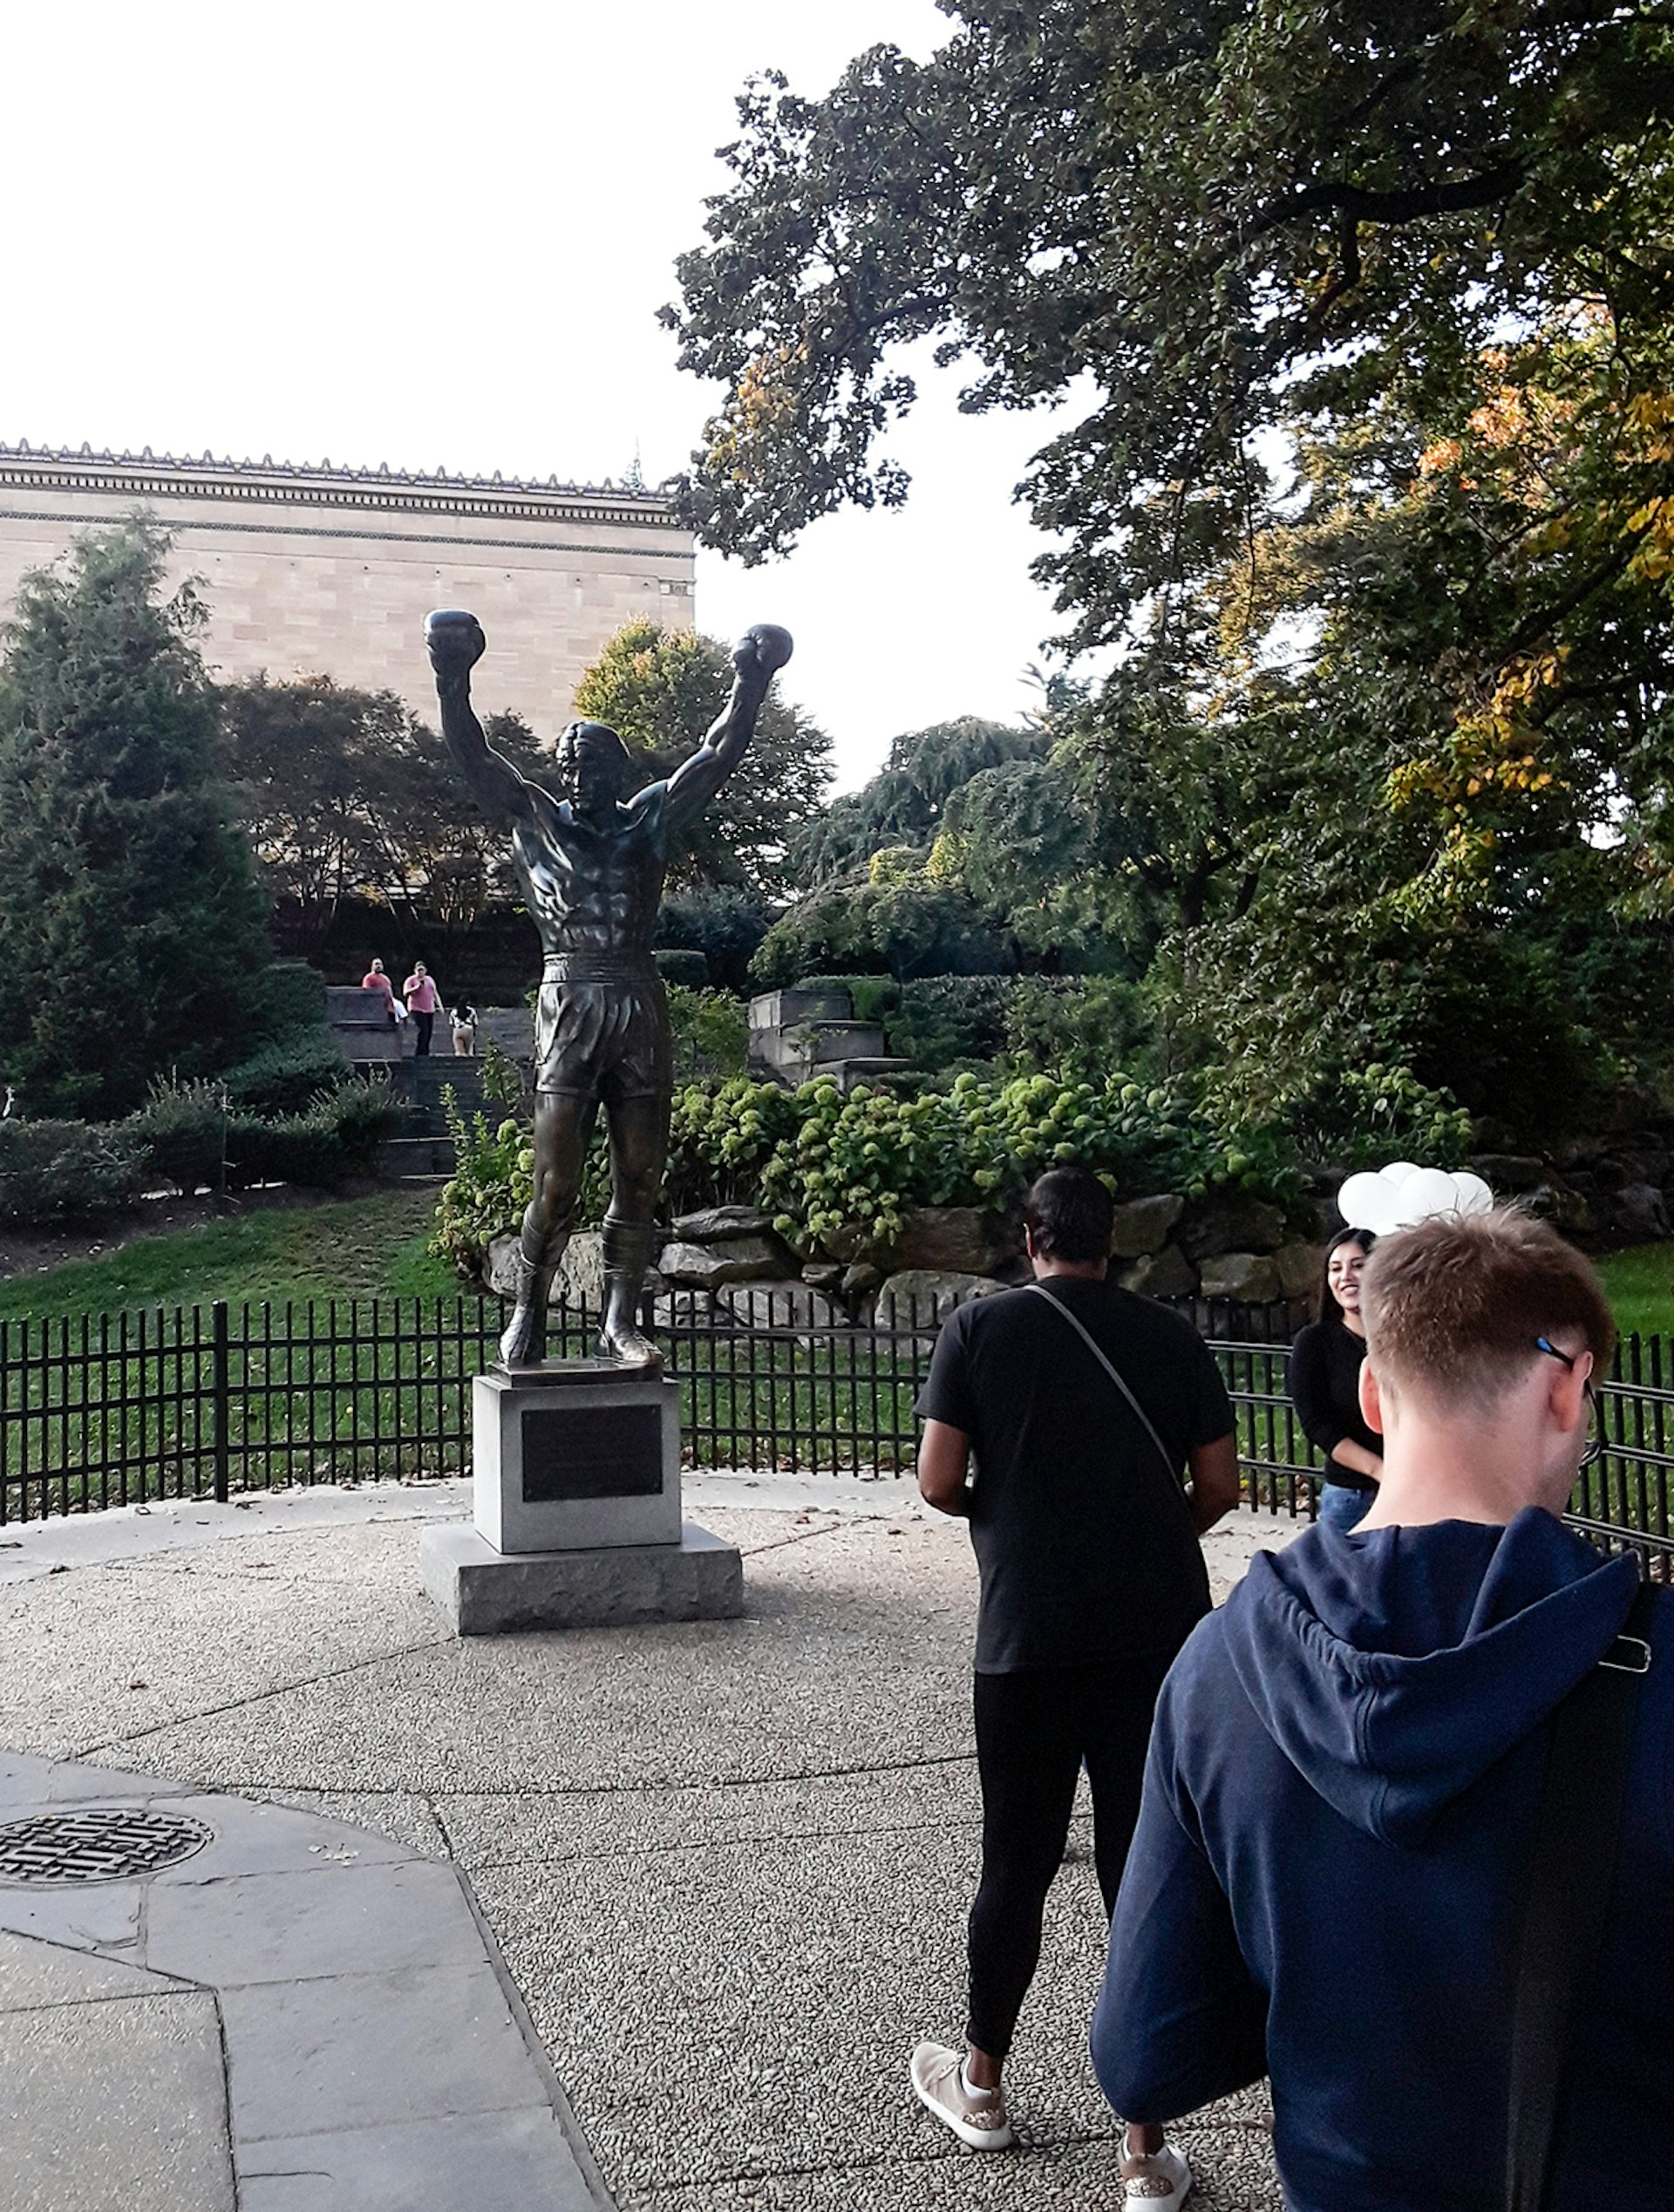 Two men line up to photograph the bronze Rocky statue in Philadelphia